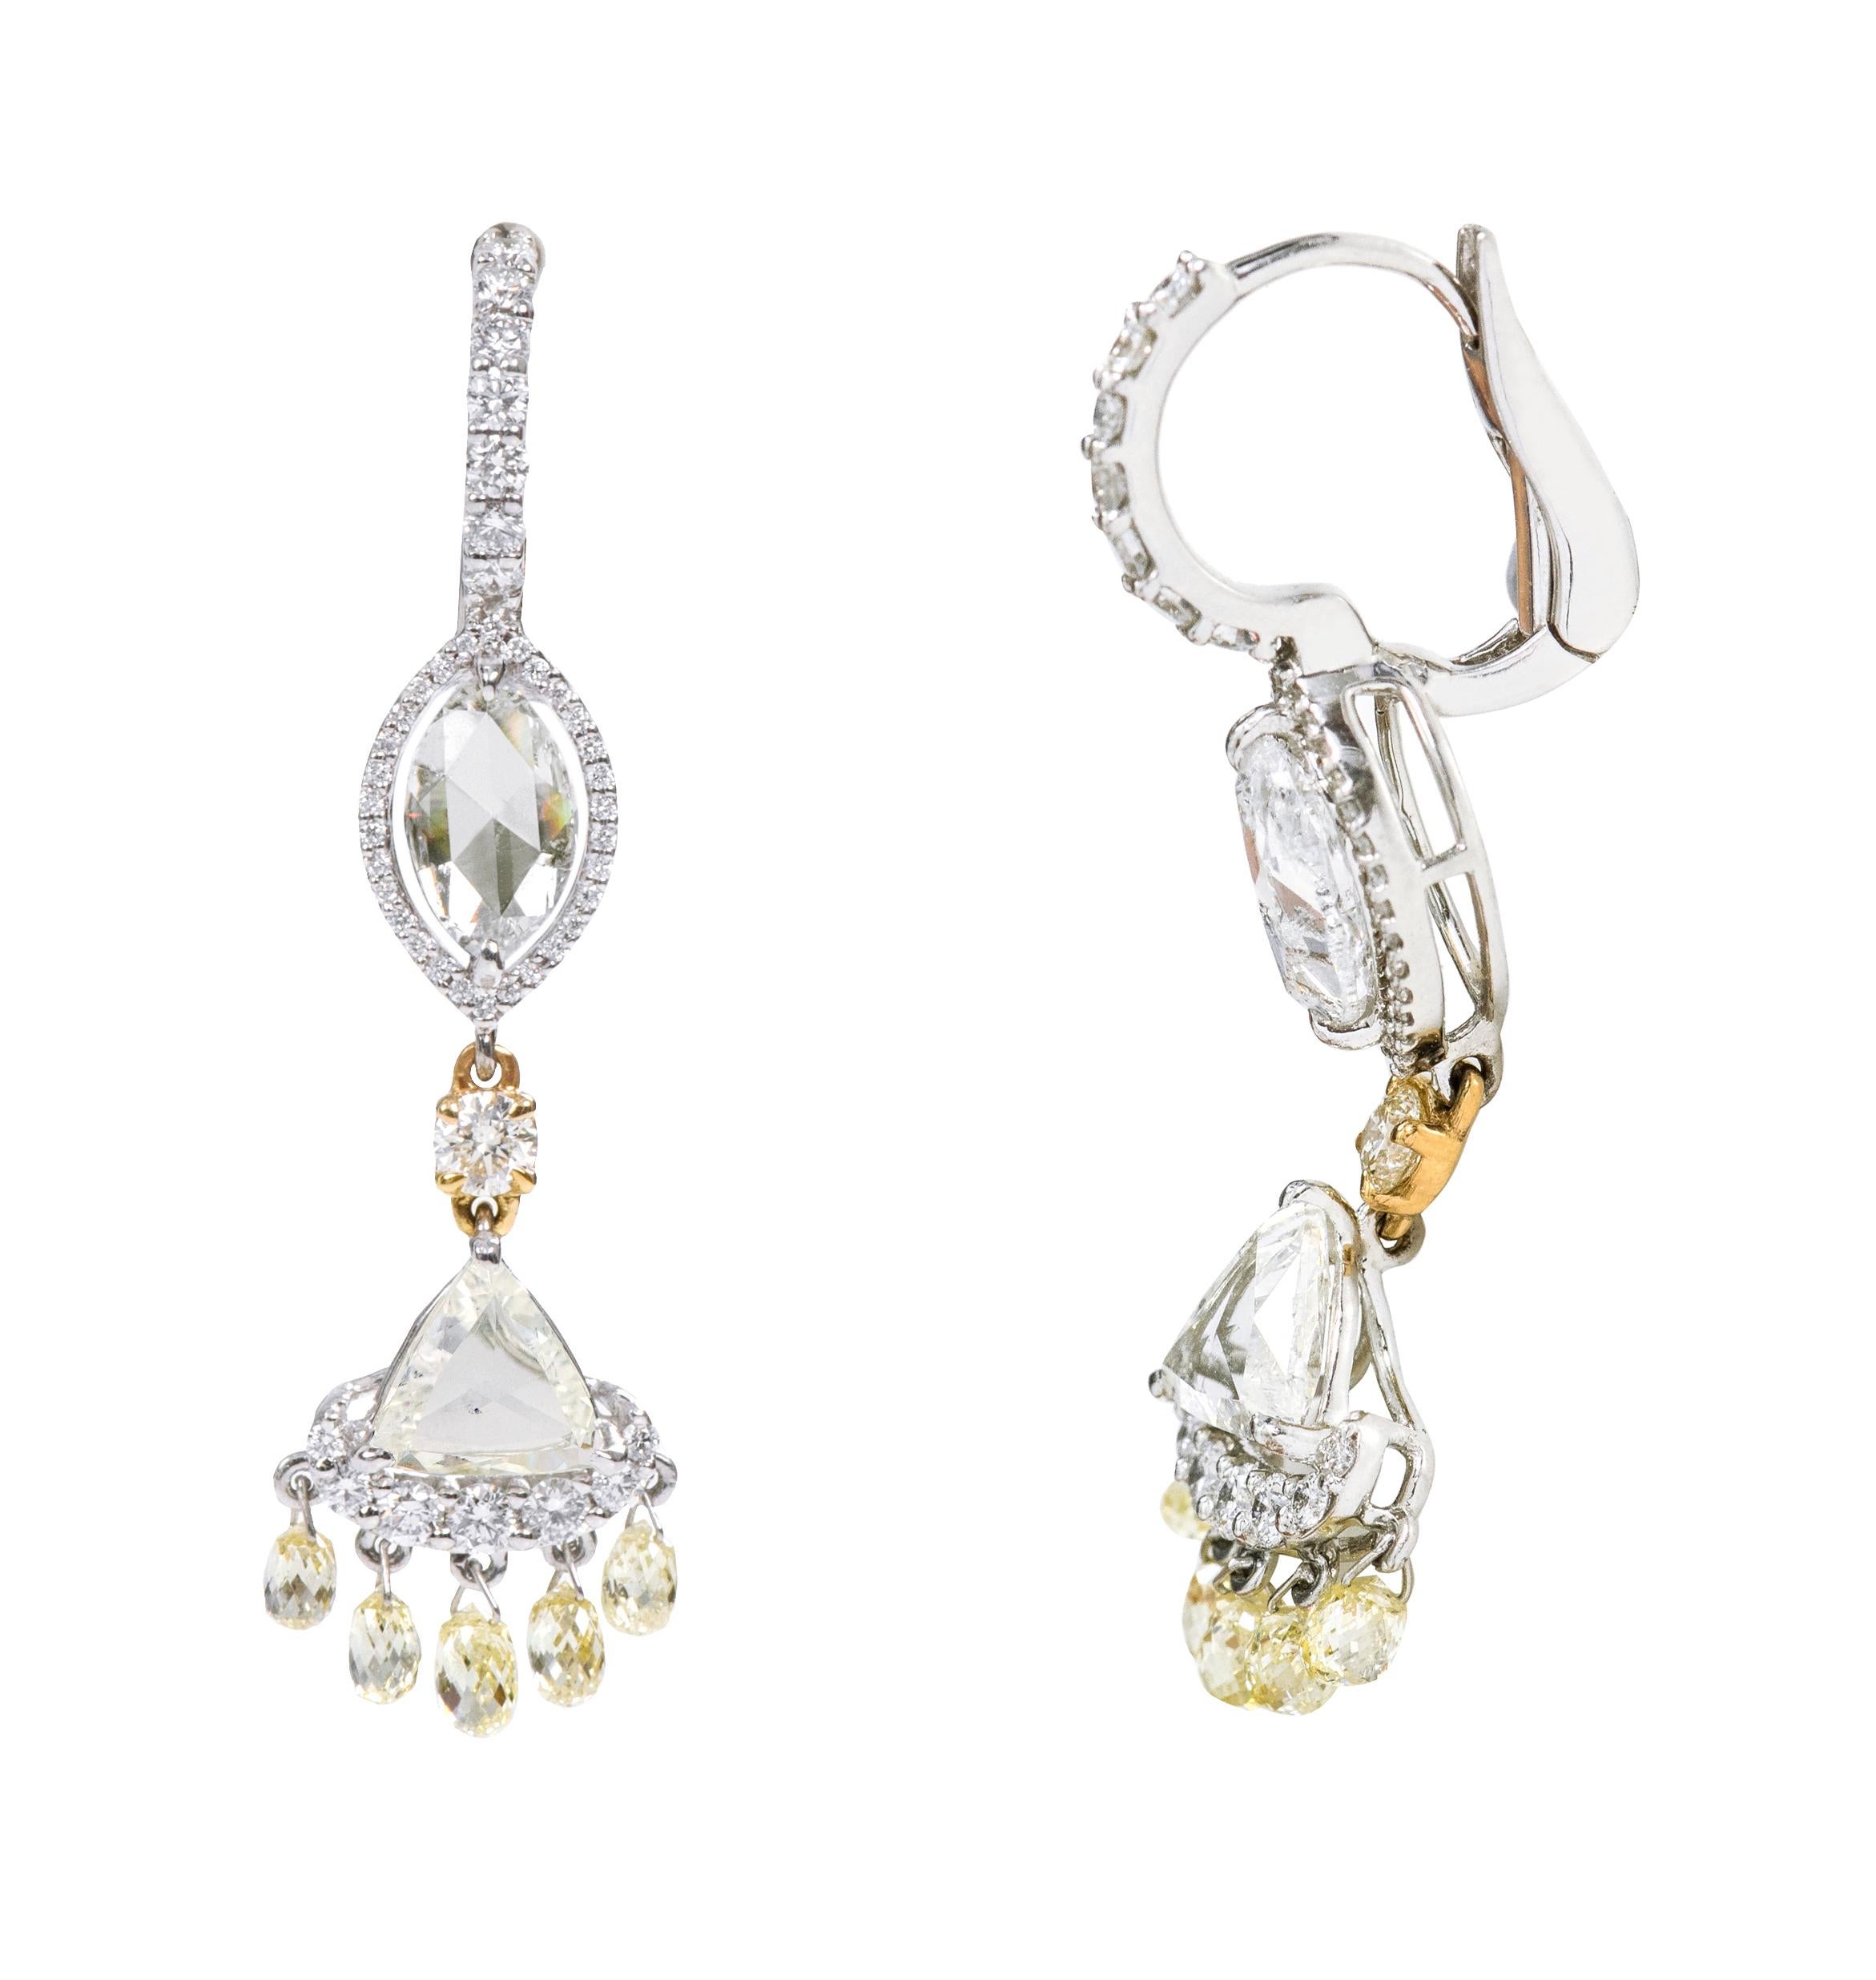 Platinum 6.96 Carat Diamond Lever-Back Drop Earrings 

This exquisite diamond long-hanging earring is divine. The bottom trapezoid rose cut solitaire diamond is enhanced with a half-moon-shaped pave set round diamond cluster attached with beautiful